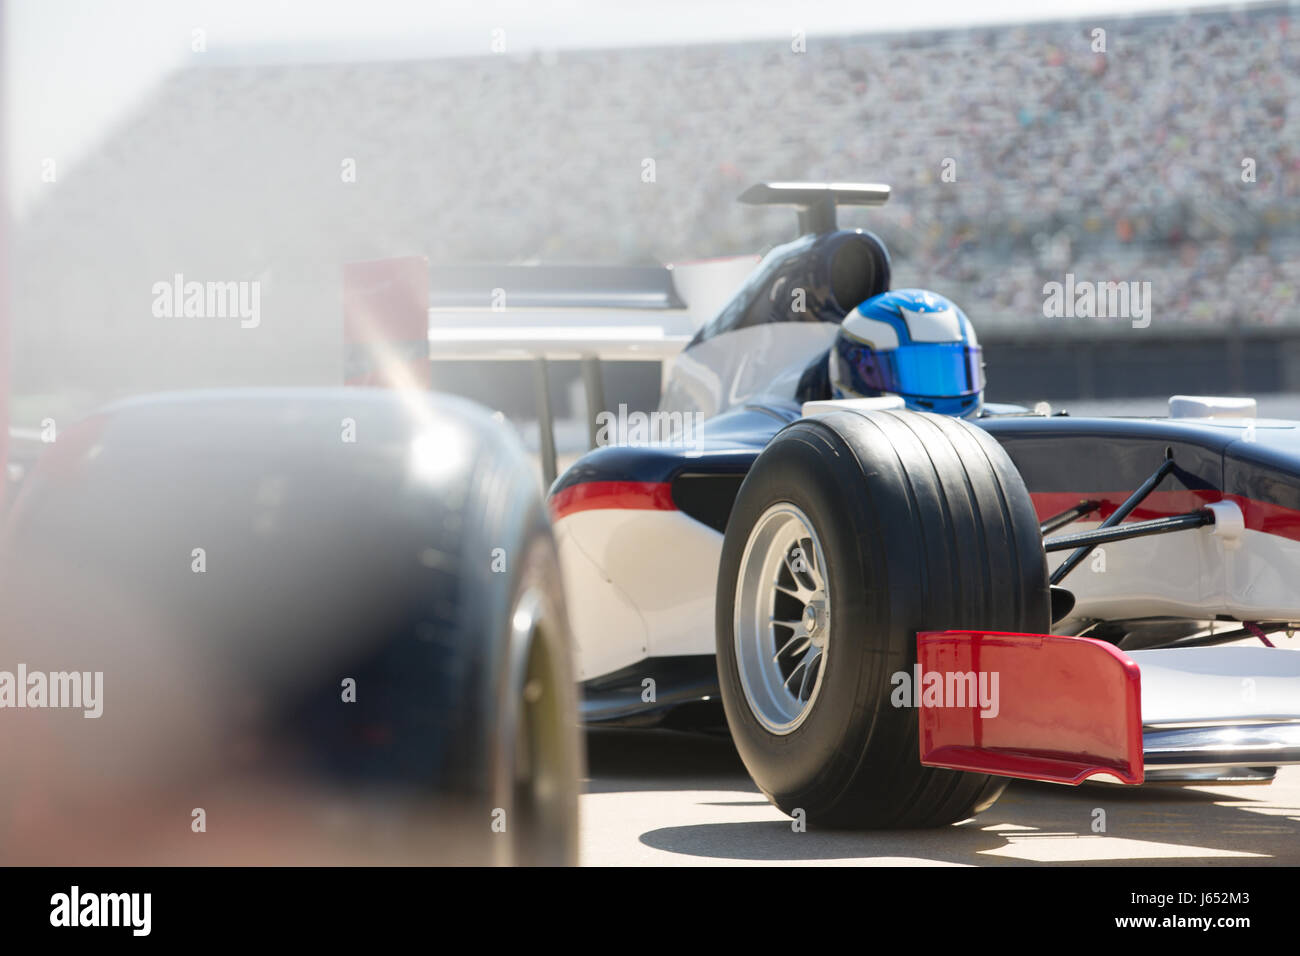 Formula one race car and driver in pit lane Stock Photo